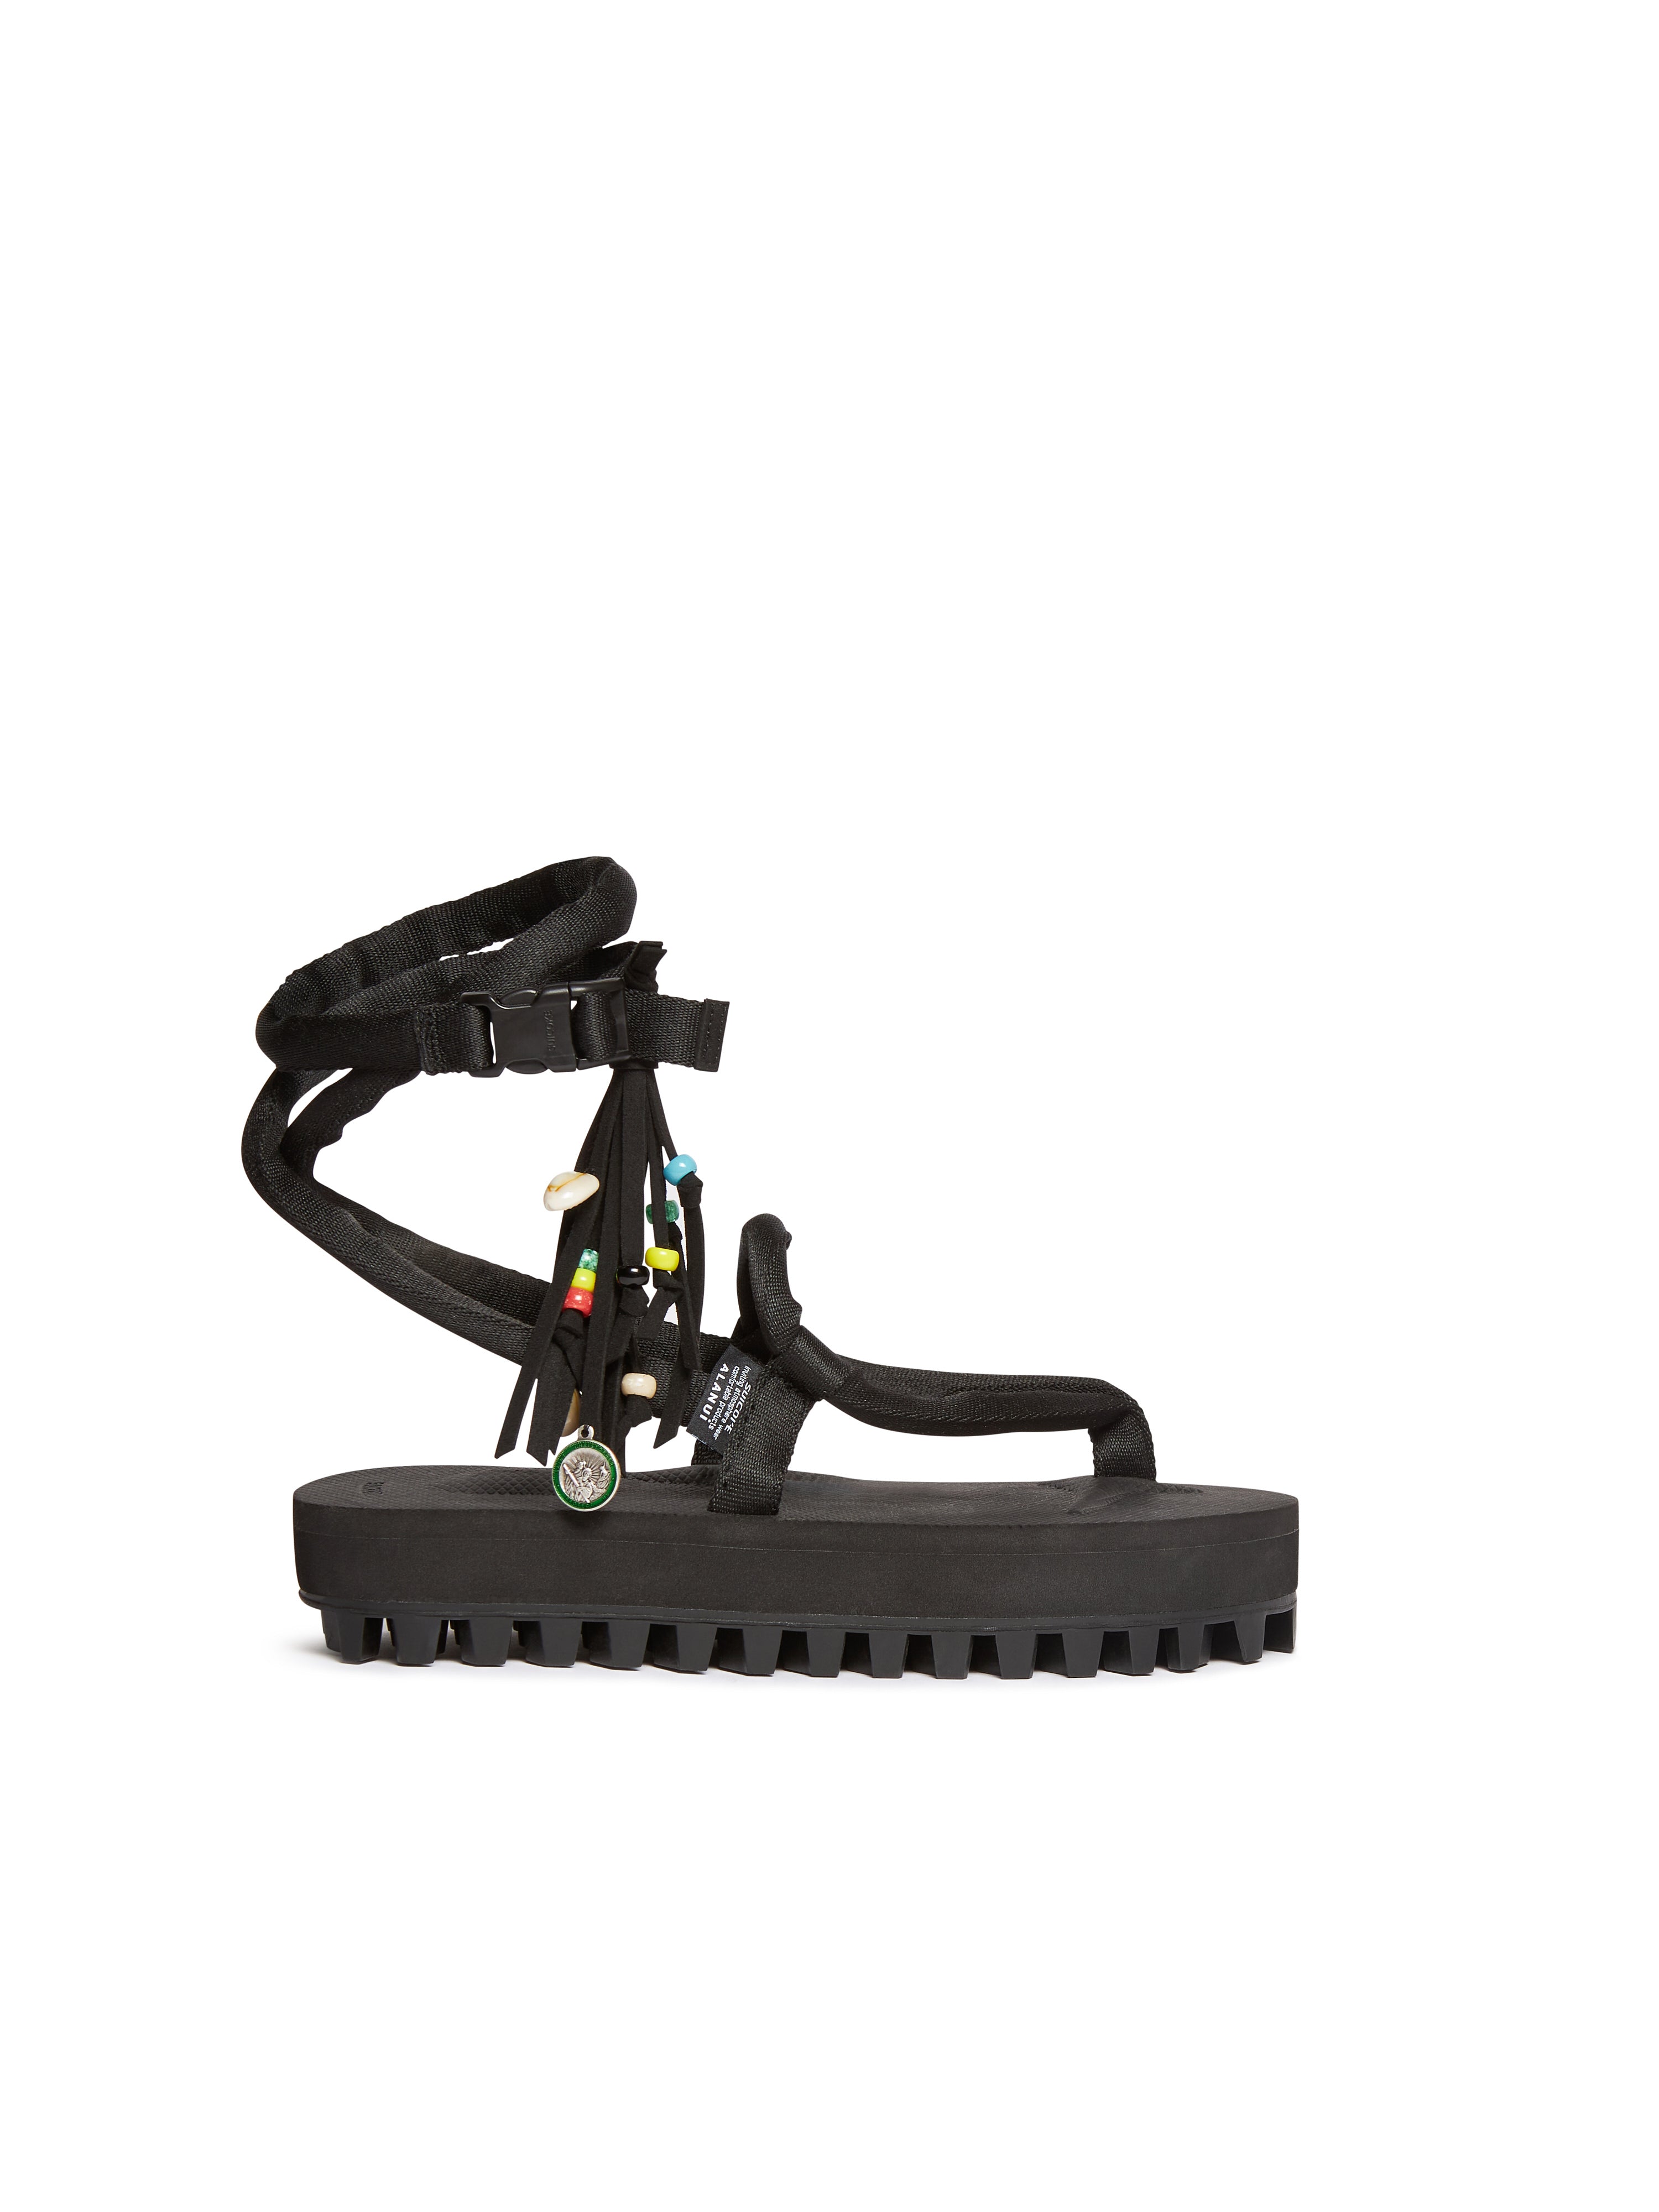 SUICOKE Alanui Edition GUT-HI-ab sandals with Cushioned Nylon Straps w/ Suede Fringe Accents , black midsole and sole. From Spring/Summer 2022 collection on SUICOKE Official US &amp; Canada Webstore.